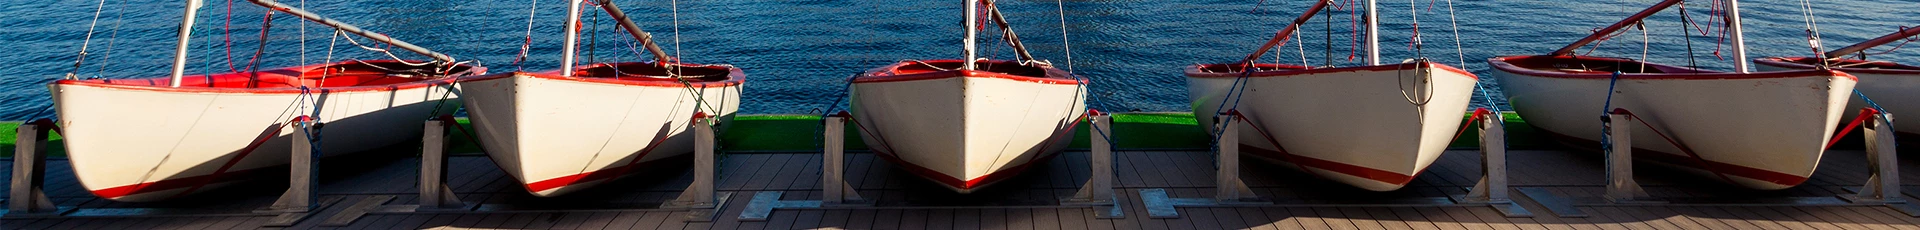 Boat Removal, Dismantle and Disposal in Virginia Beach Virginia